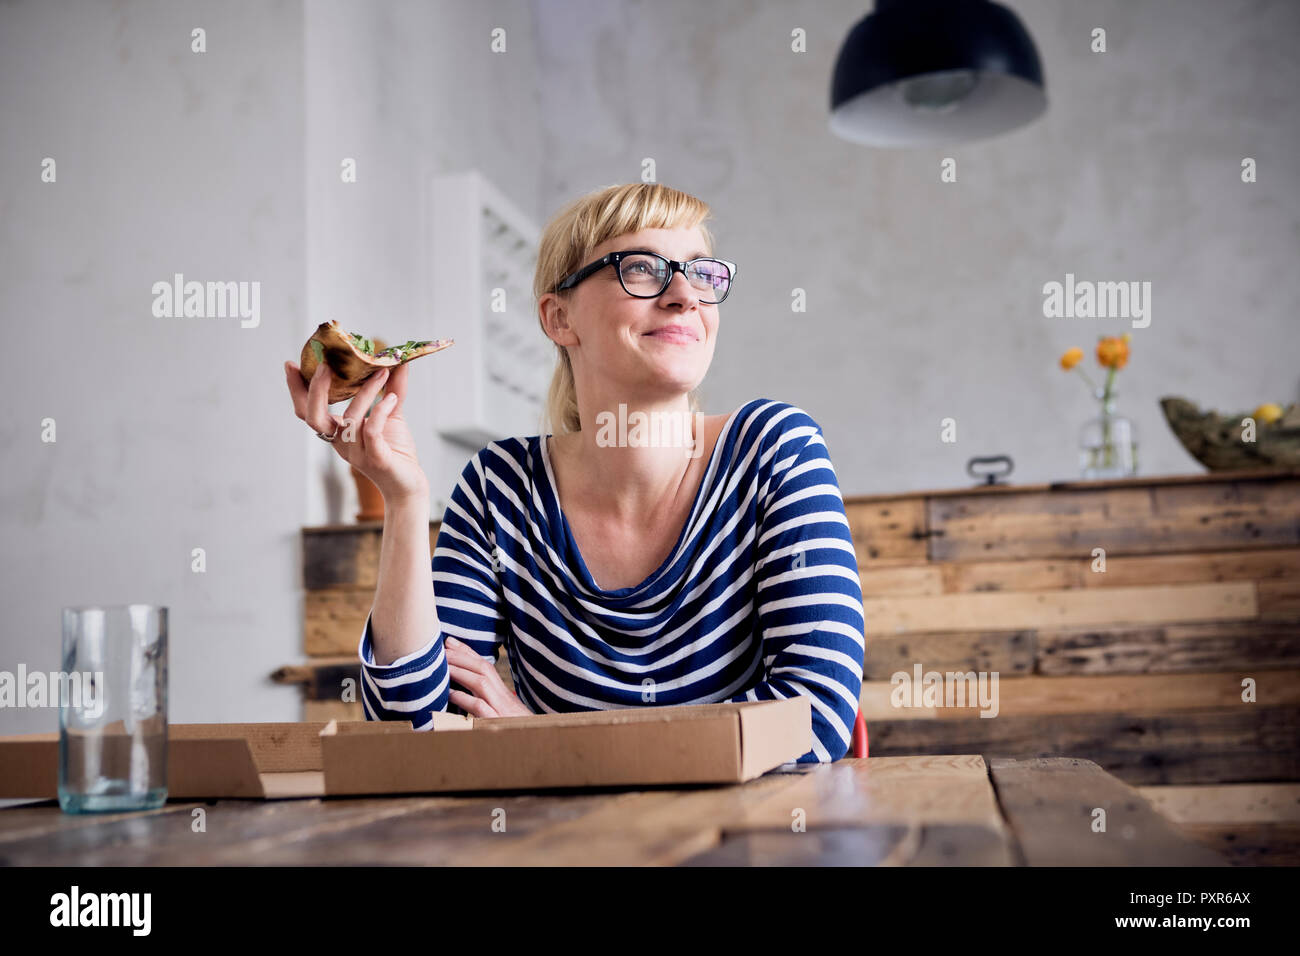 Portrait of smiling woman eating pizza Stock Photo